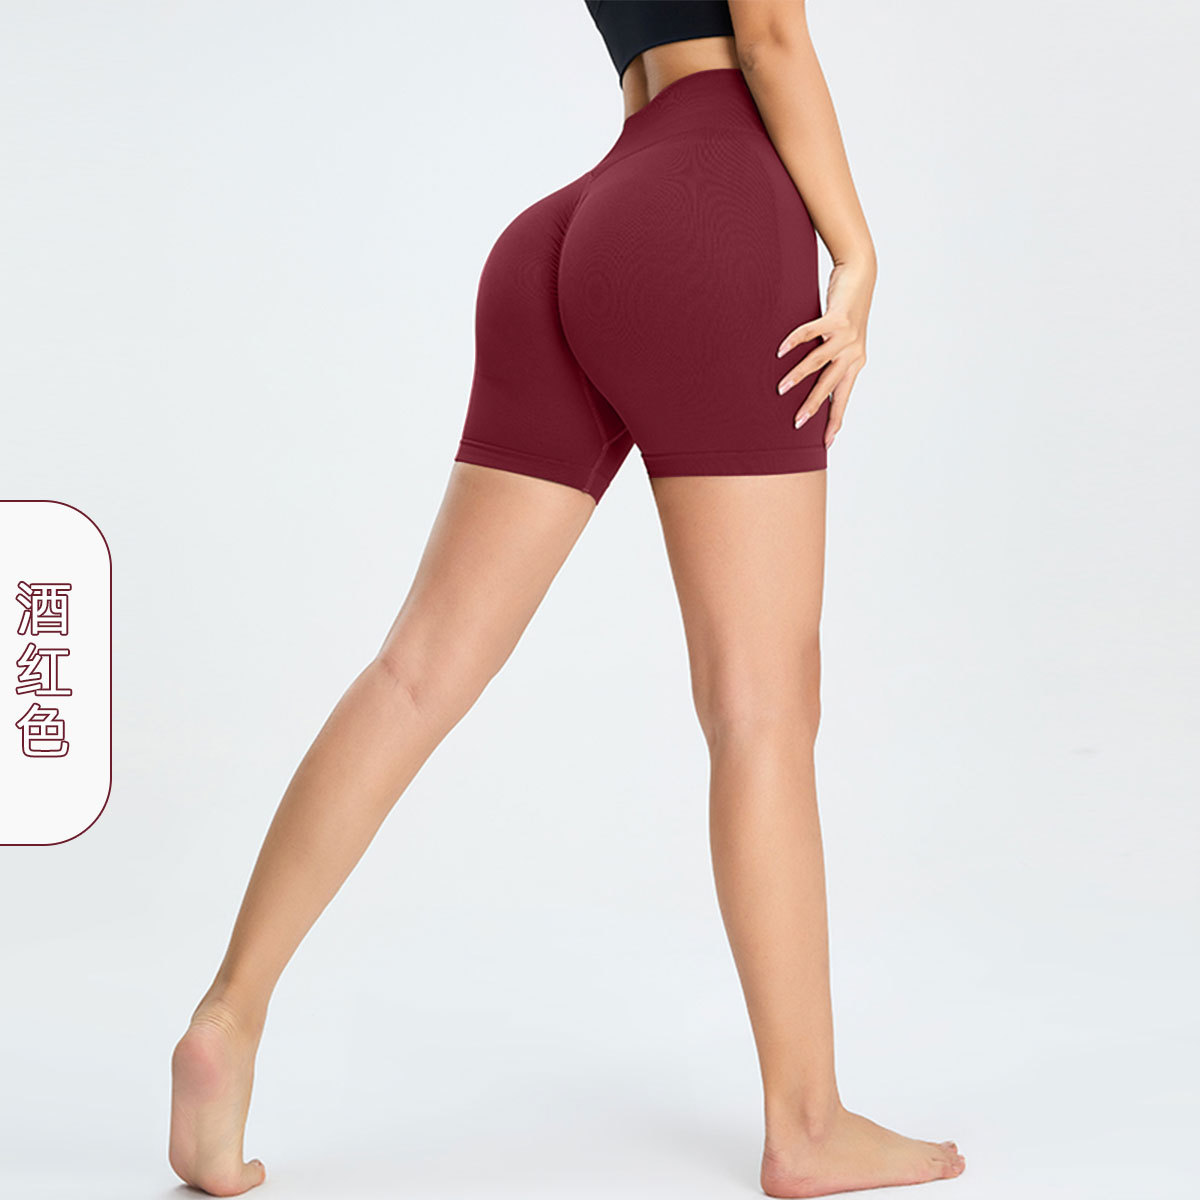 European and American Seamless Yoga Shorts Women's Three-Point Outer Wear High Waist Peach Sports Pants Nude Feel Quick-Drying Fitness Yoga Wear